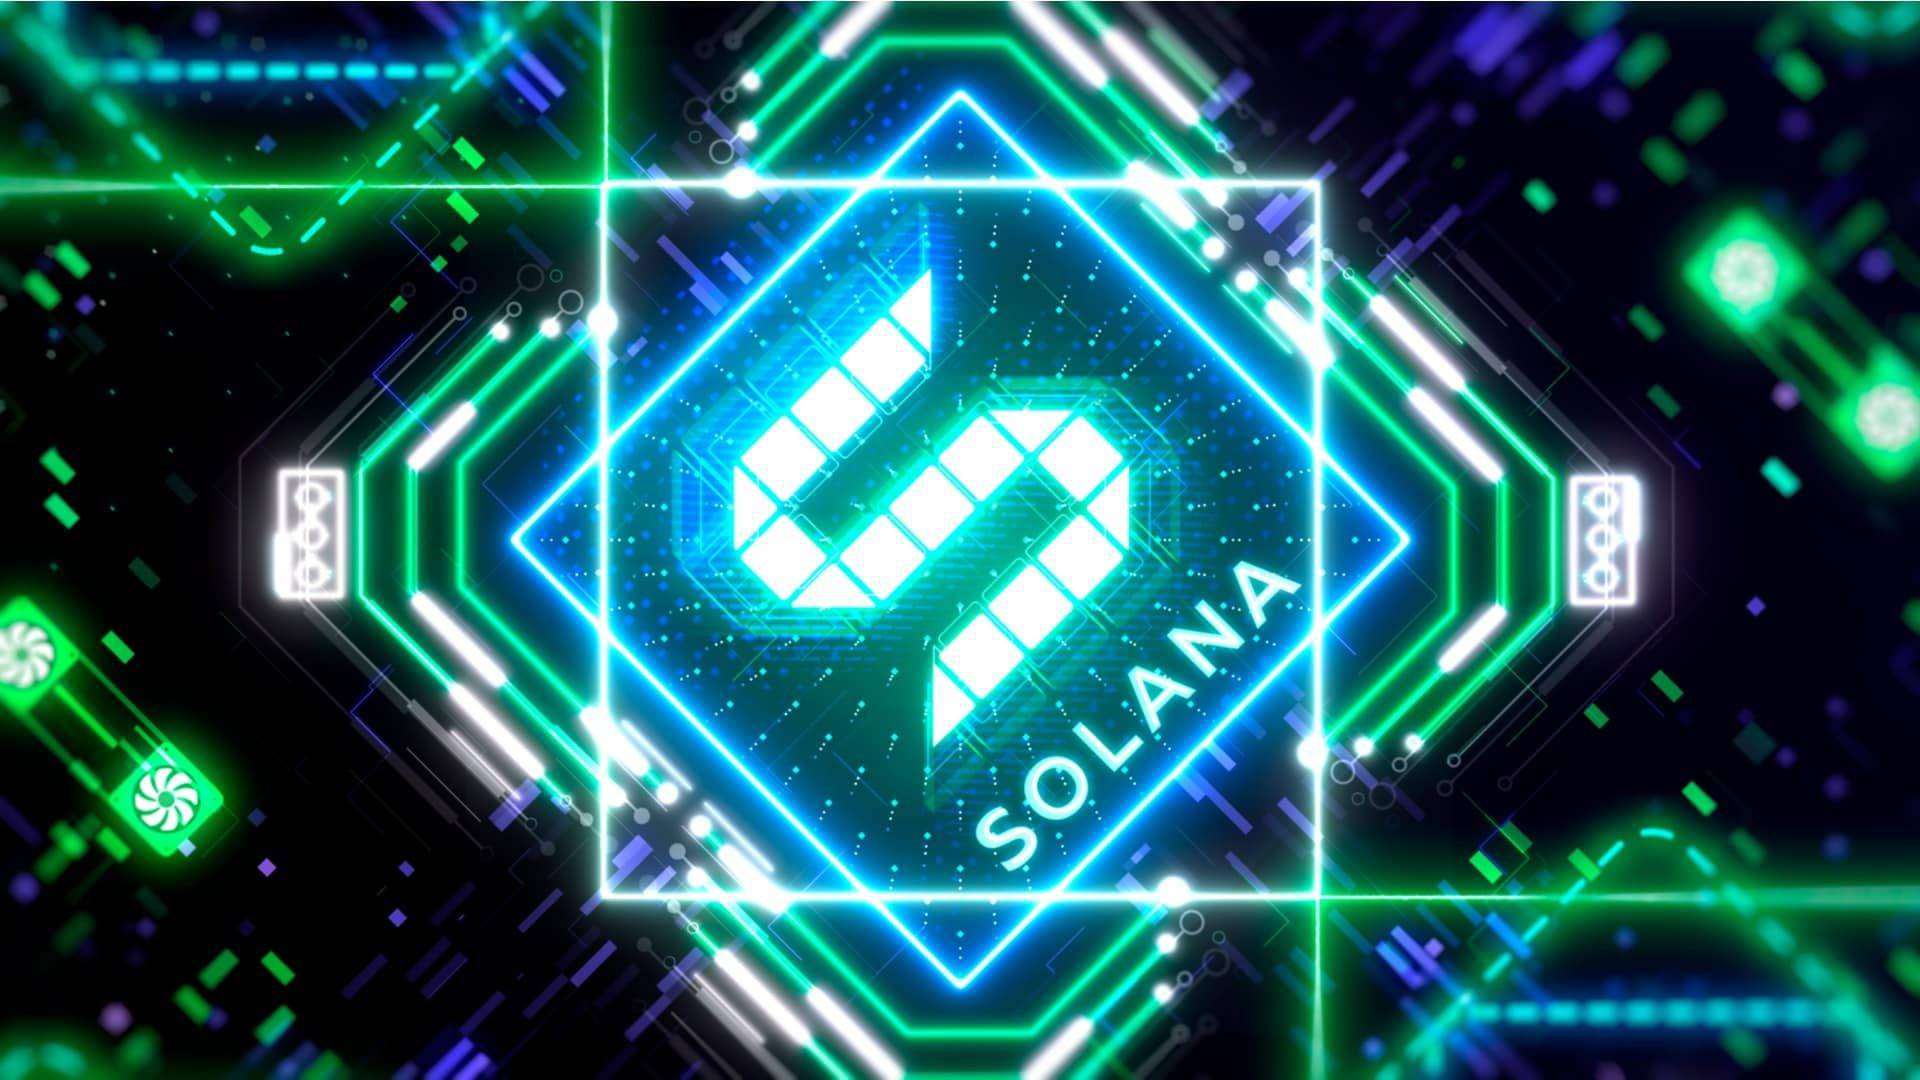 Solana SOL Price Up 13.4% to $30.48 – Where to Buy SOL